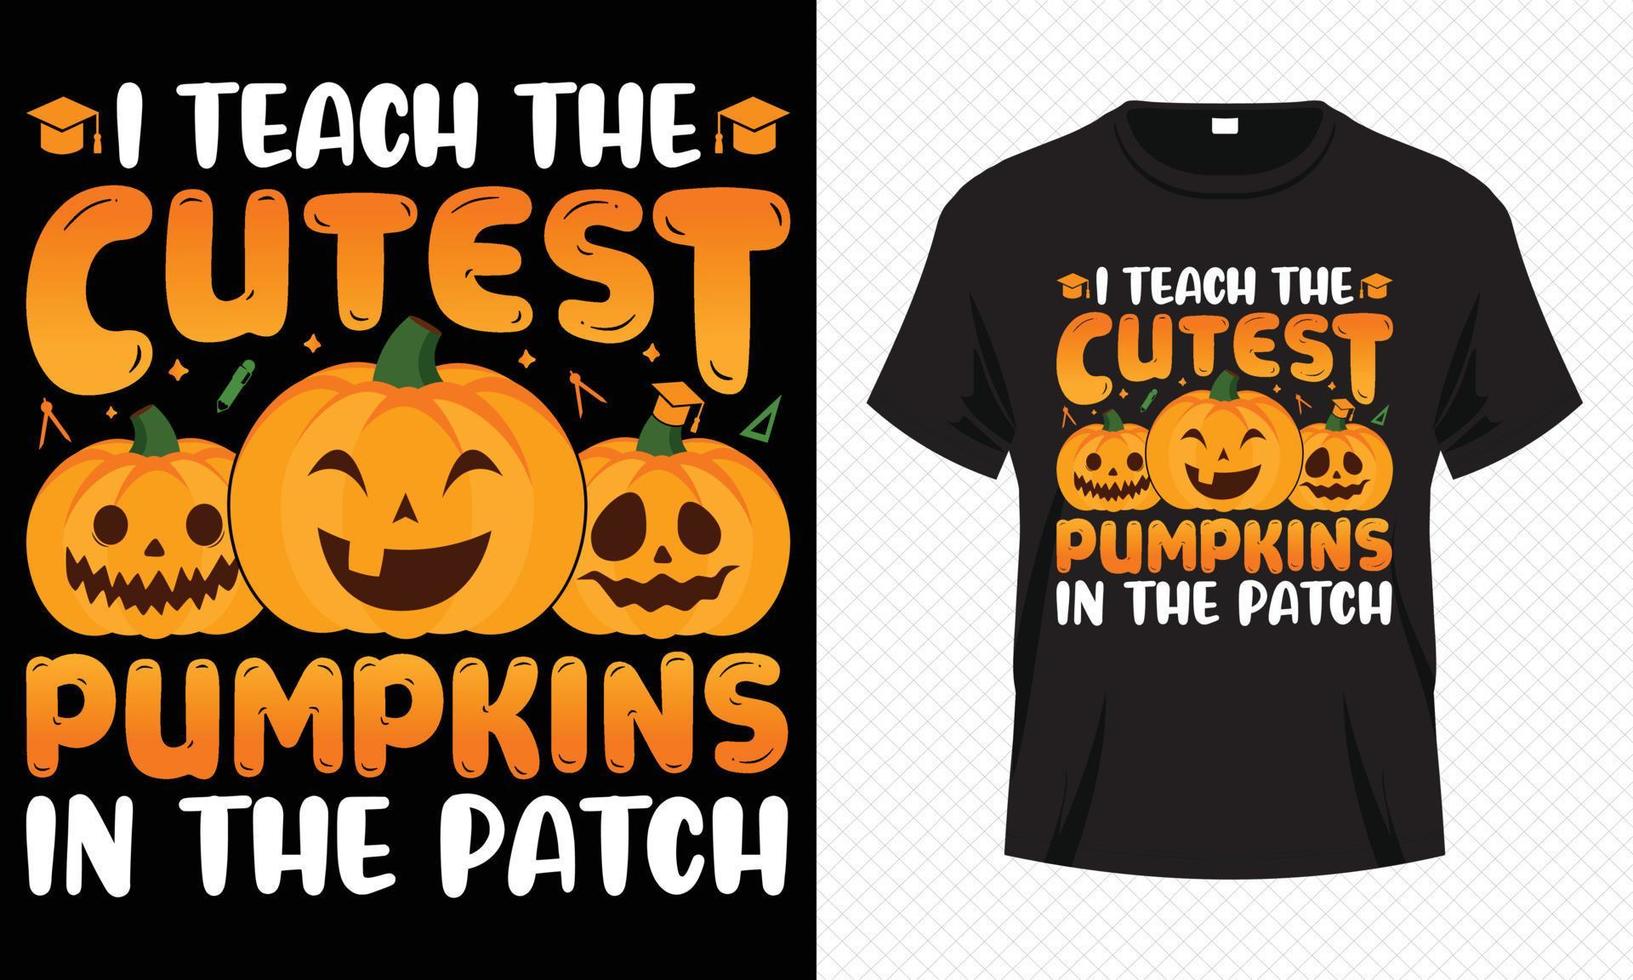 I Teach the Cutest Pumpkins in the Patch - Happy Halloween t-shirt design vector template. Teacher t-shirt design for Halloween day. Printable Halloween Vector design of pumpkin and study elements.